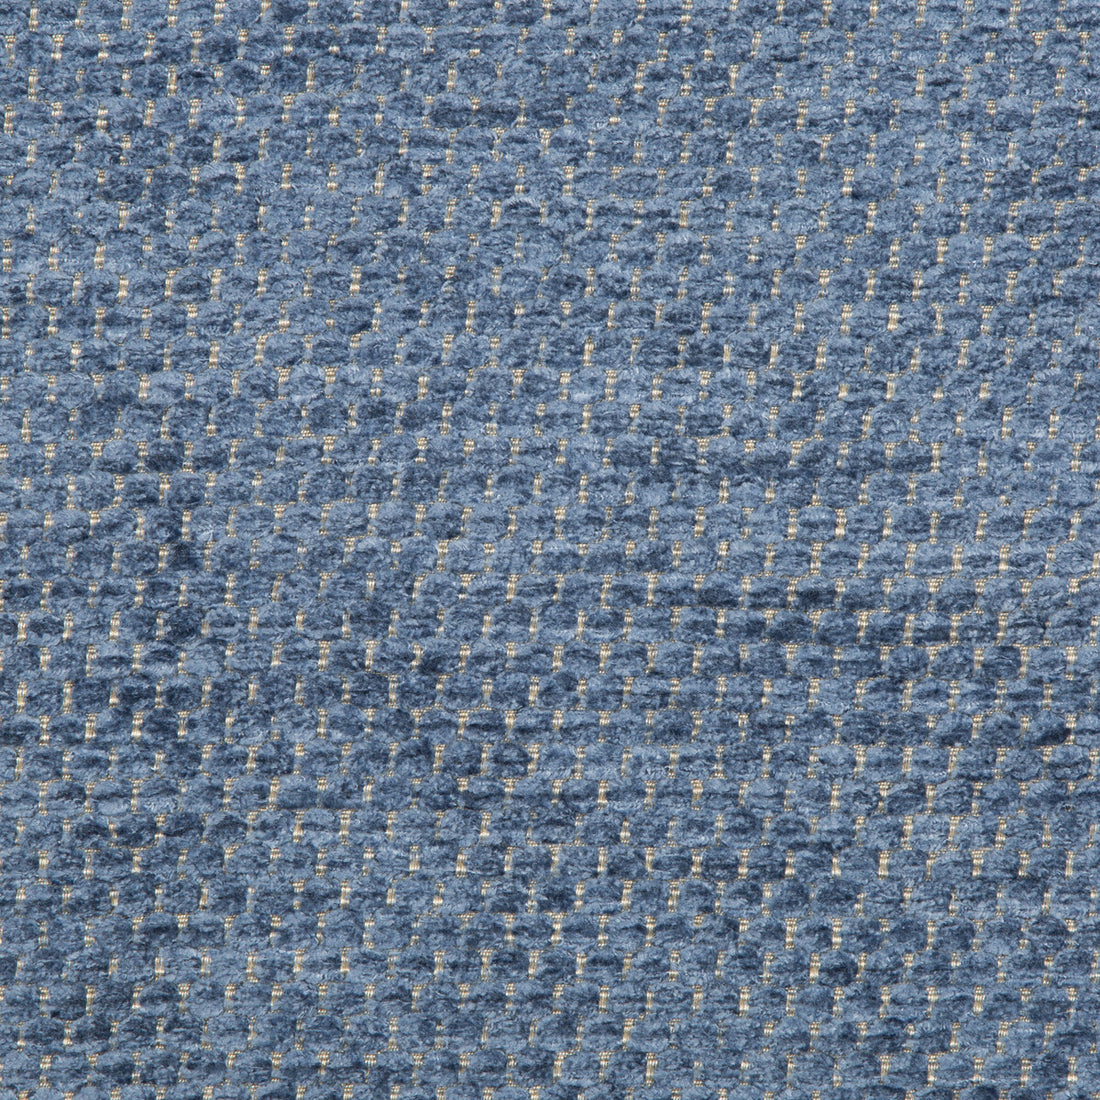 Lonsdale fabric in blue color - pattern 2016125.5.0 - by Lee Jofa in the Furness Weaves collection